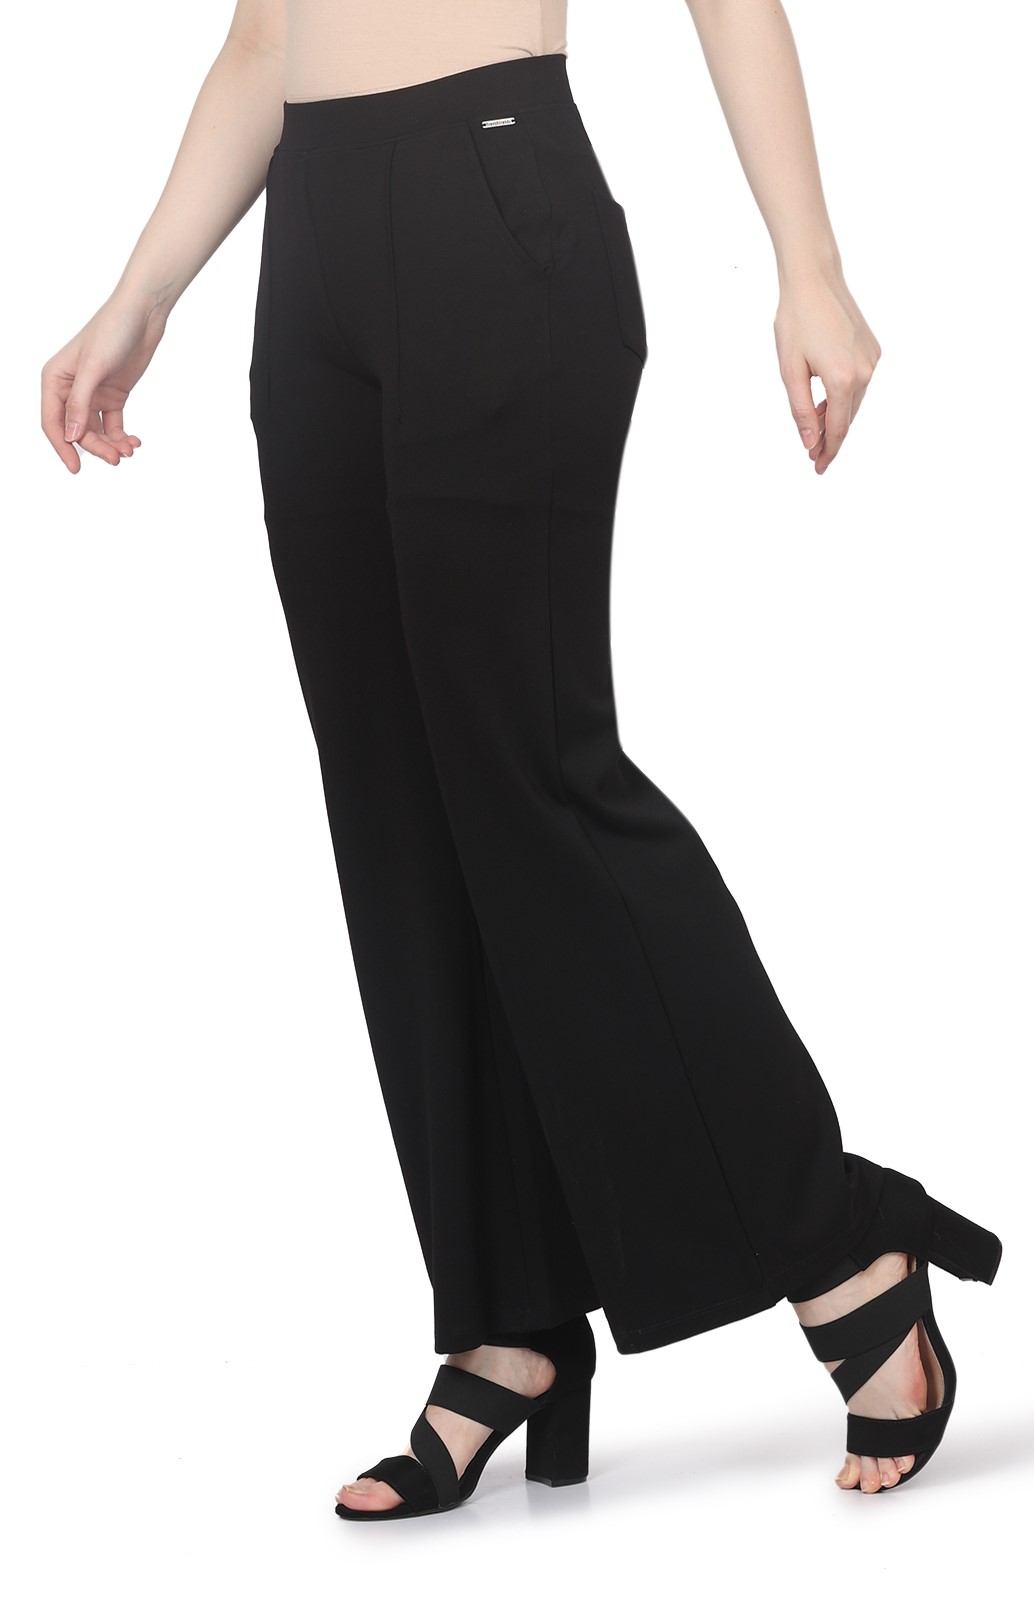 https://frenchtrendz.com/images/thumbs/0007795_frenchtrendz-schifield-black-bell-bottom-pant.jpeg